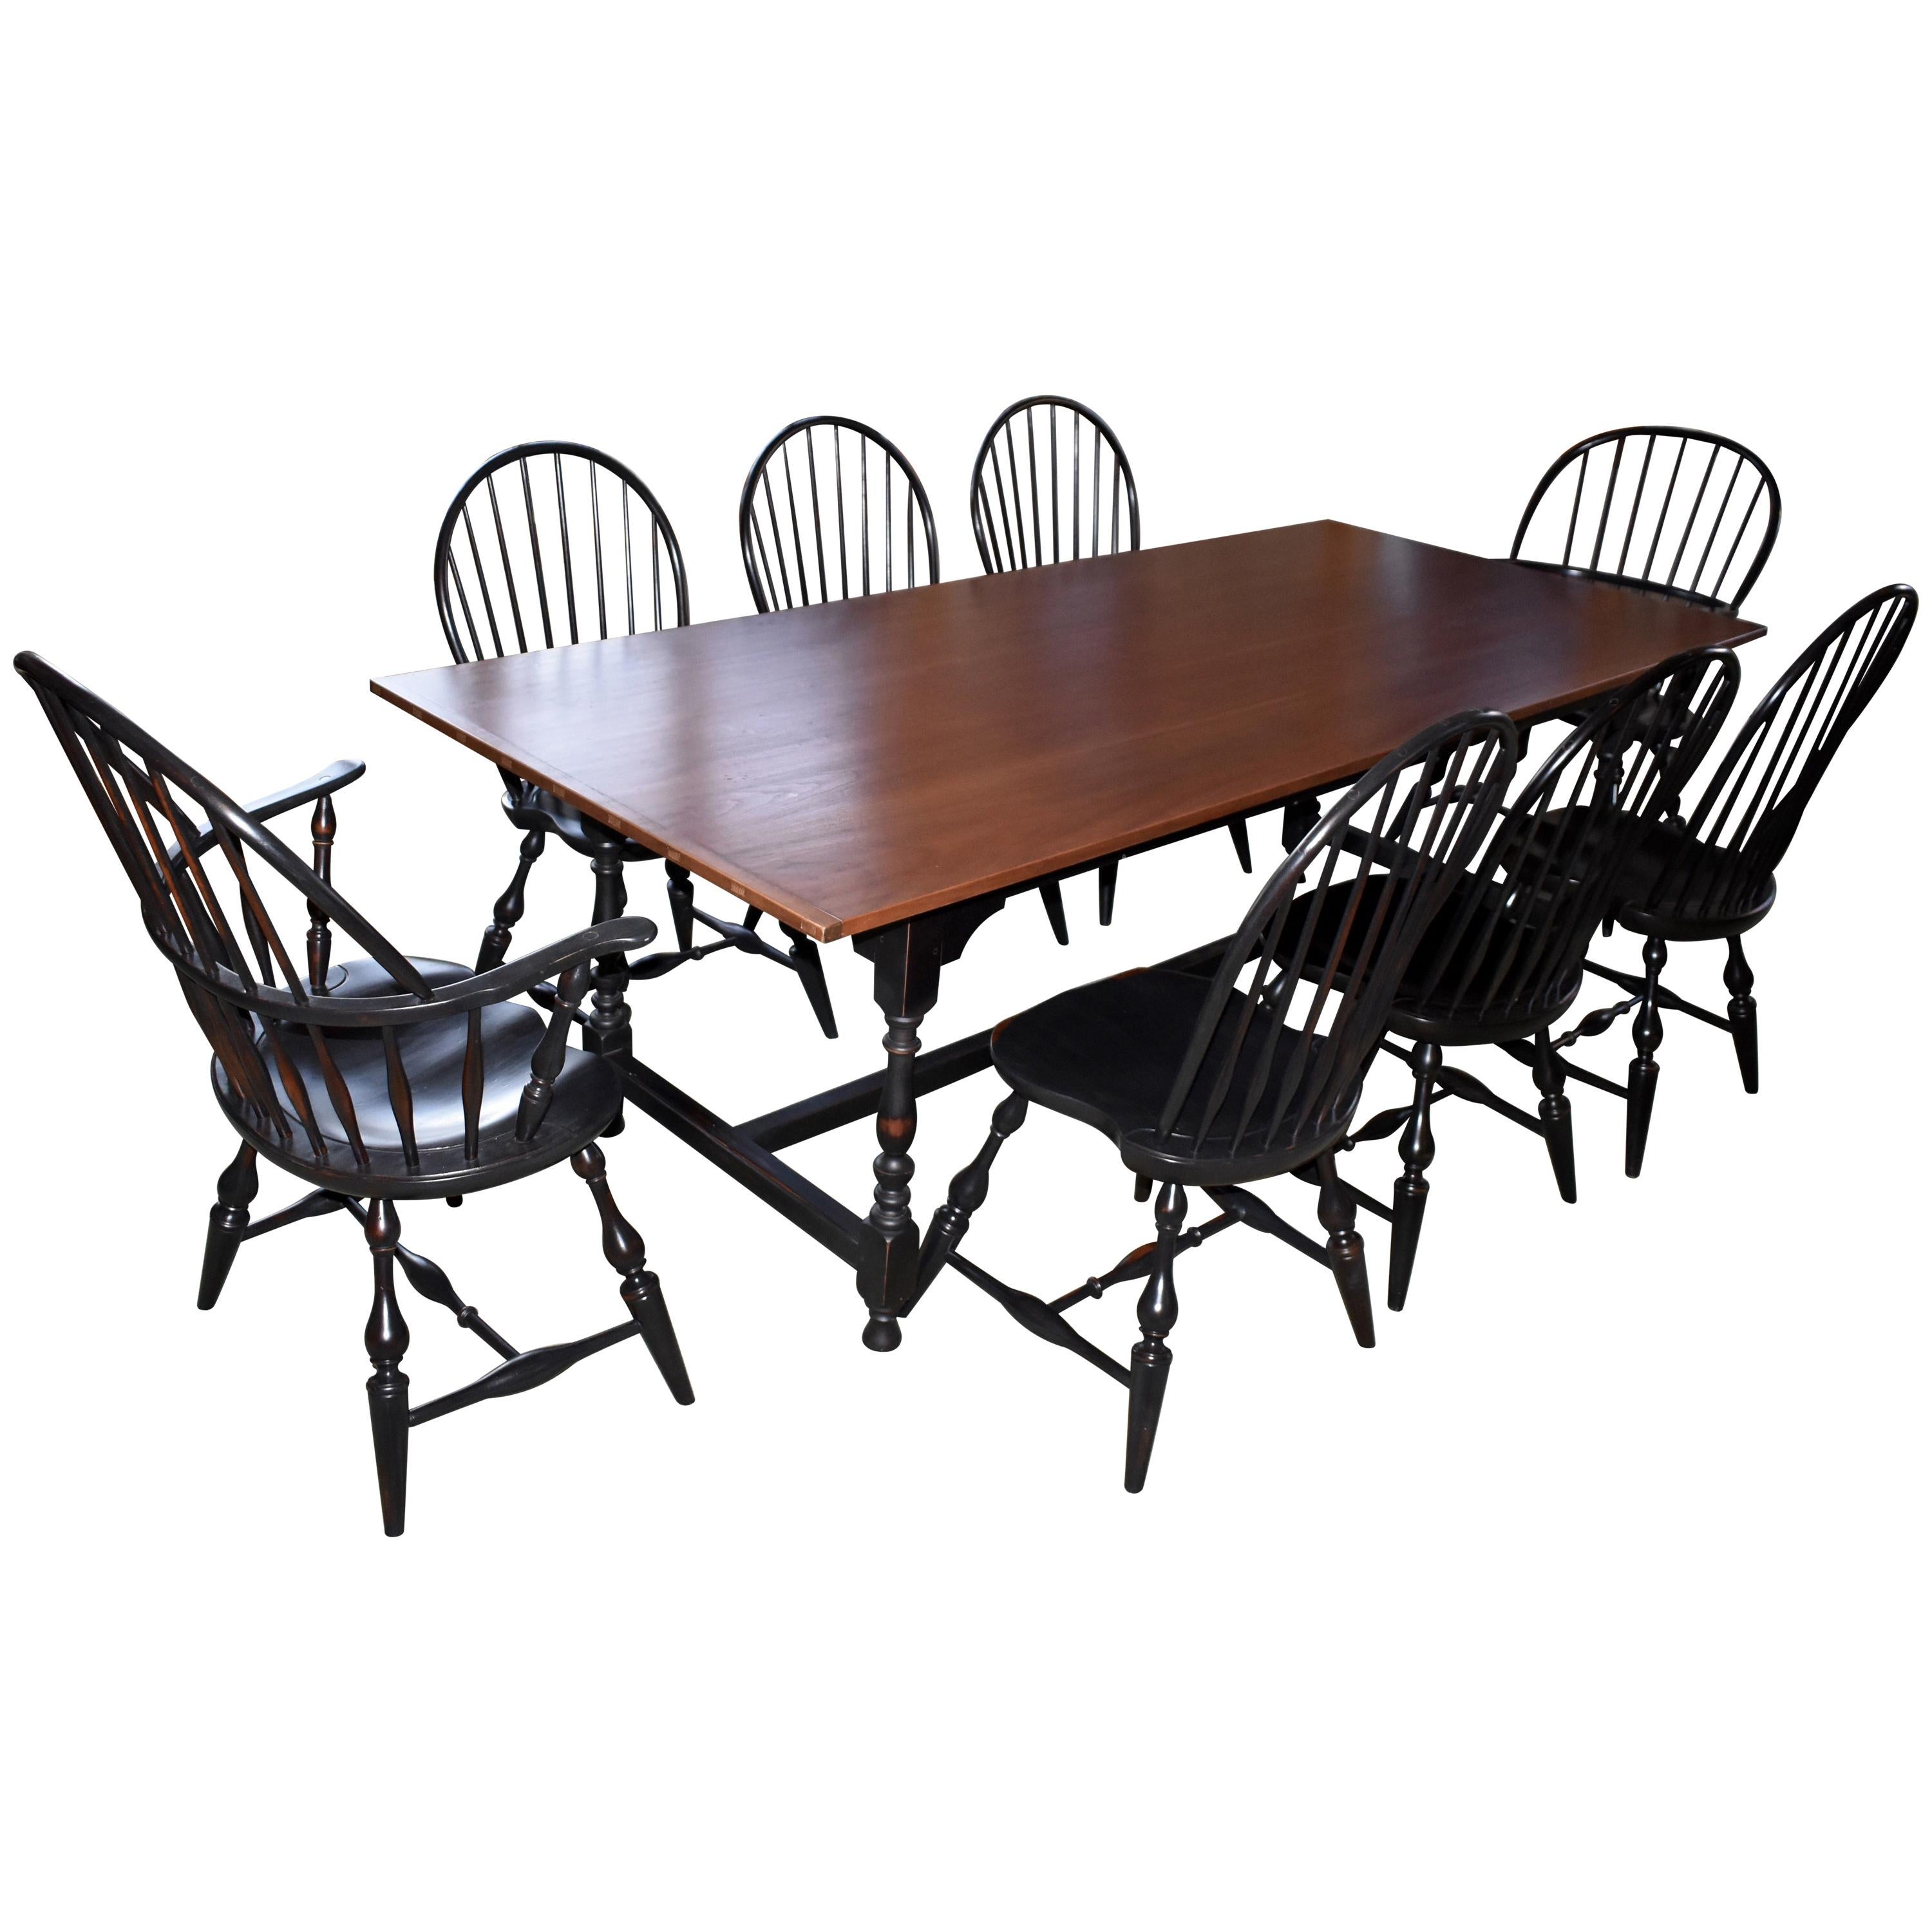 Tavern Table in Cherry, Black Base, 8 Matching Windsor Chairs, Reproduction For Sale